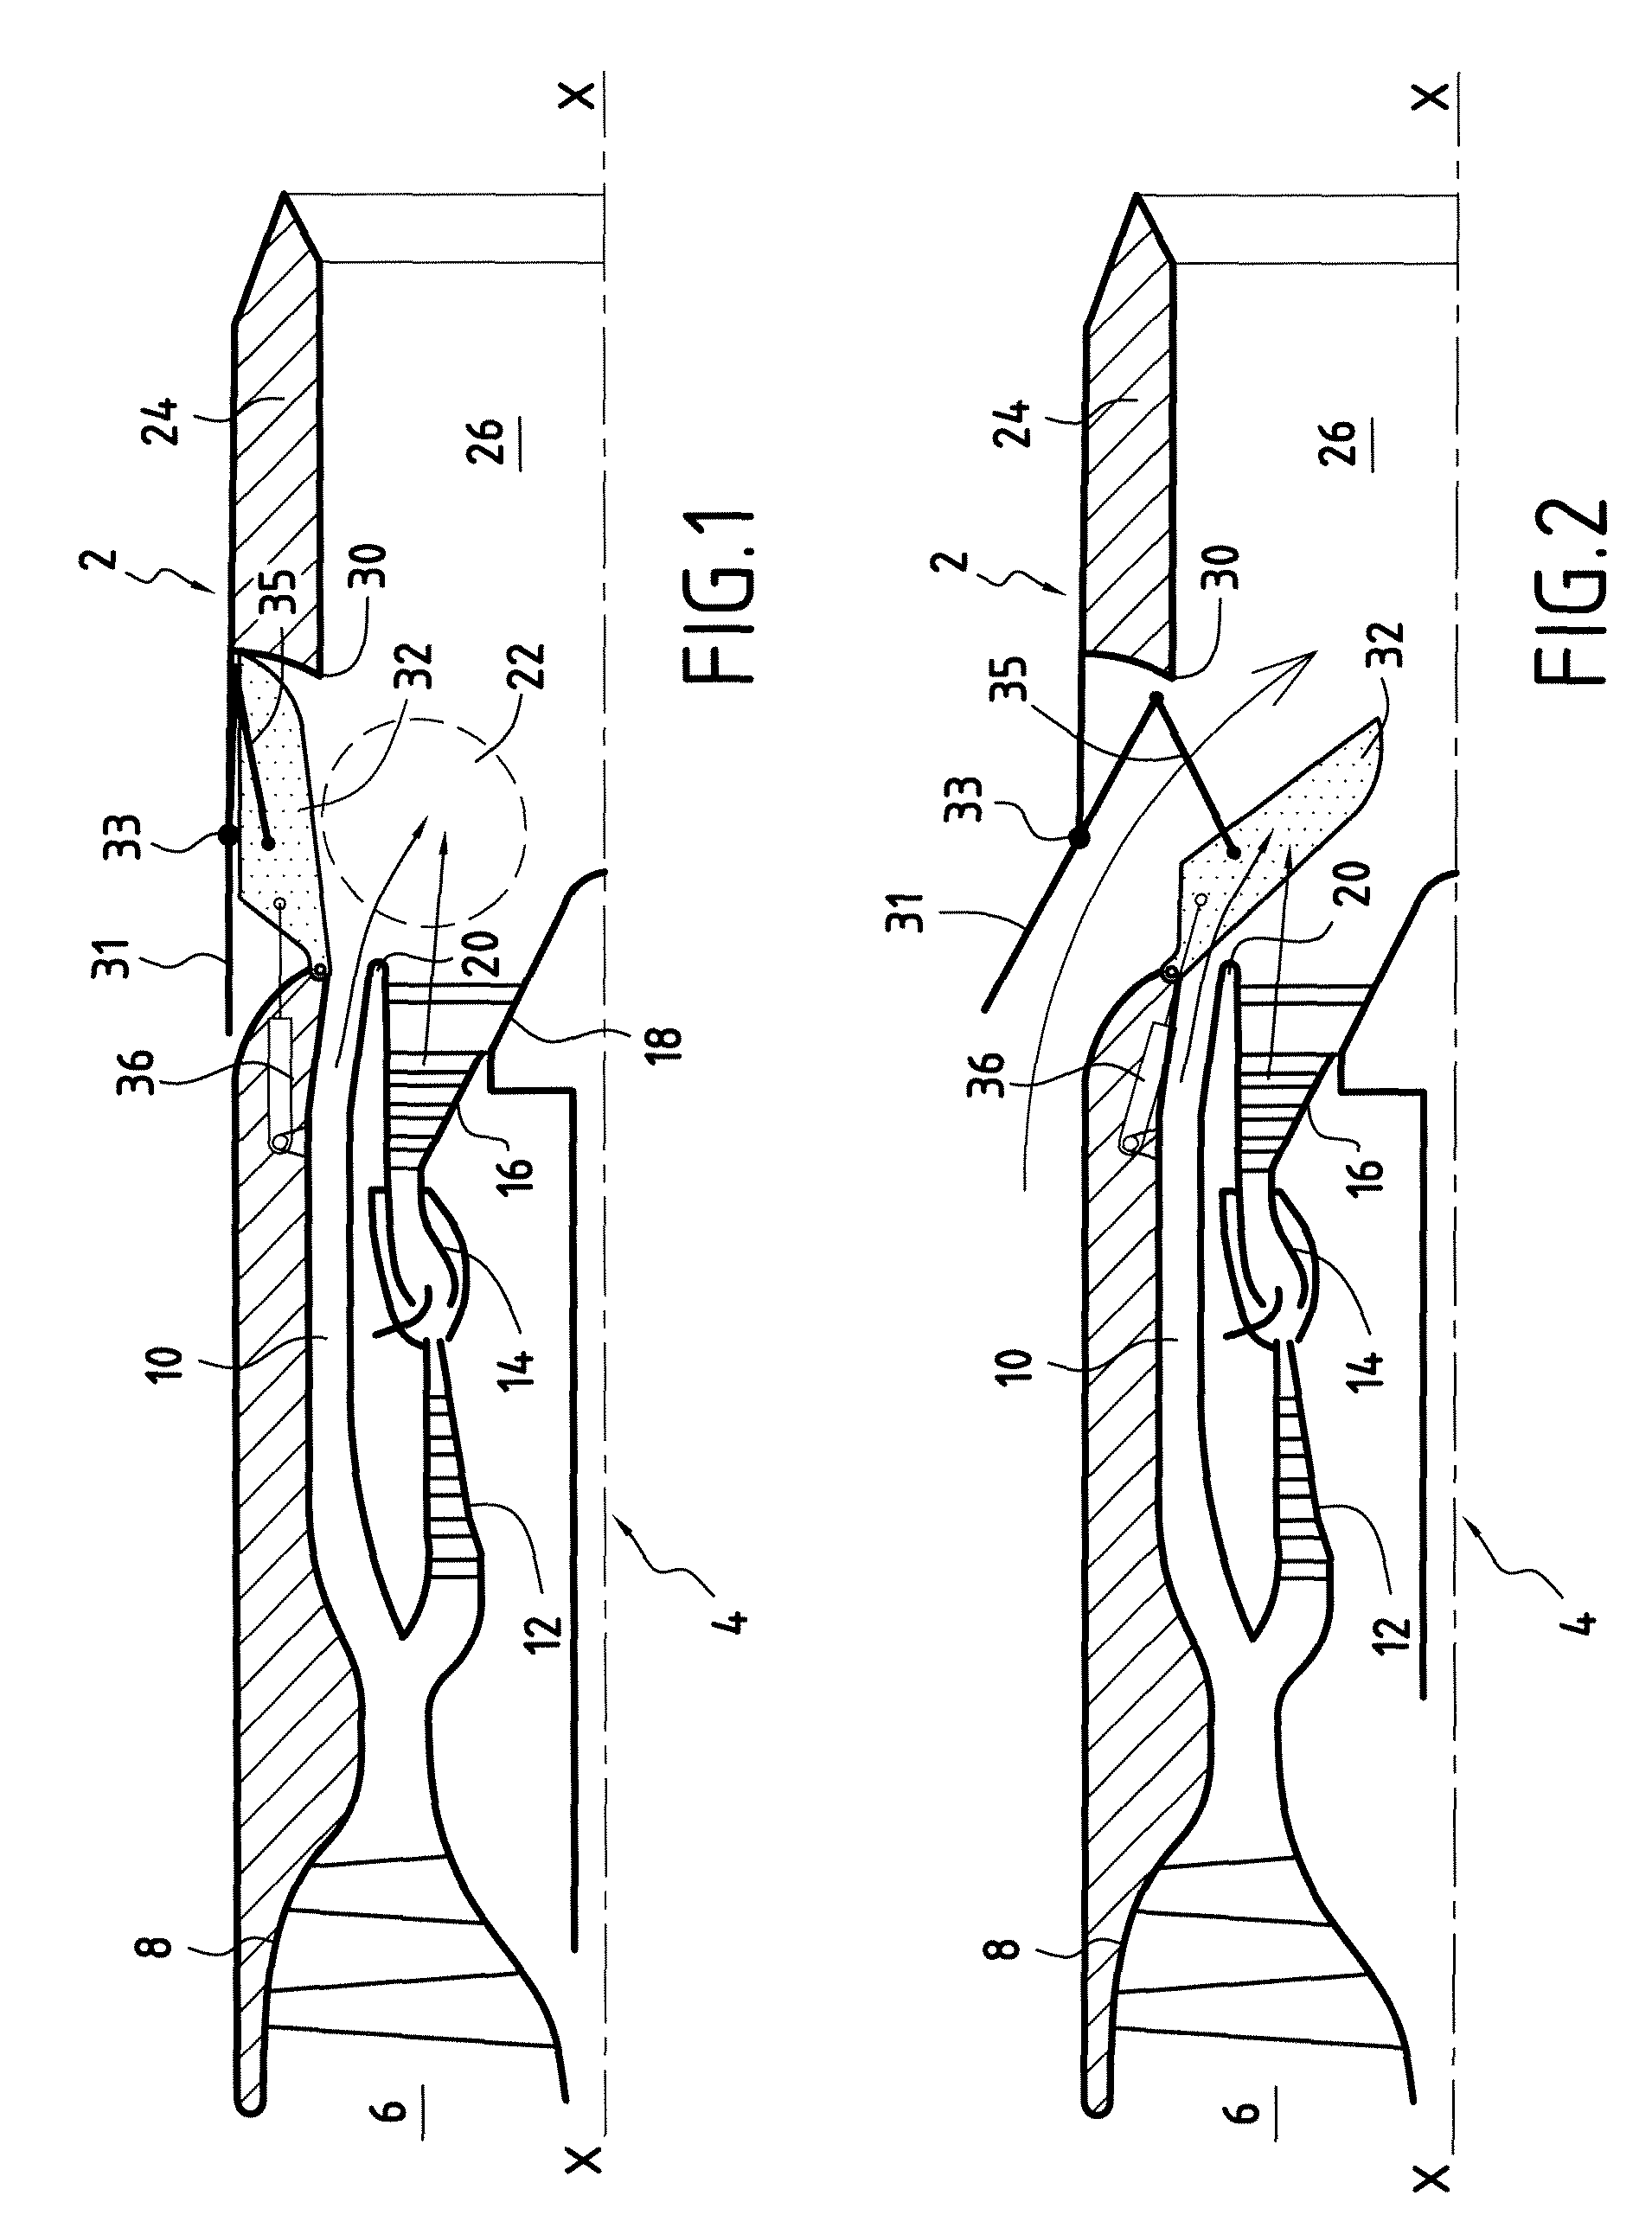 Core exhaust mixer, having a variable area, for turbo-fan jet engines of supersonic aircraft